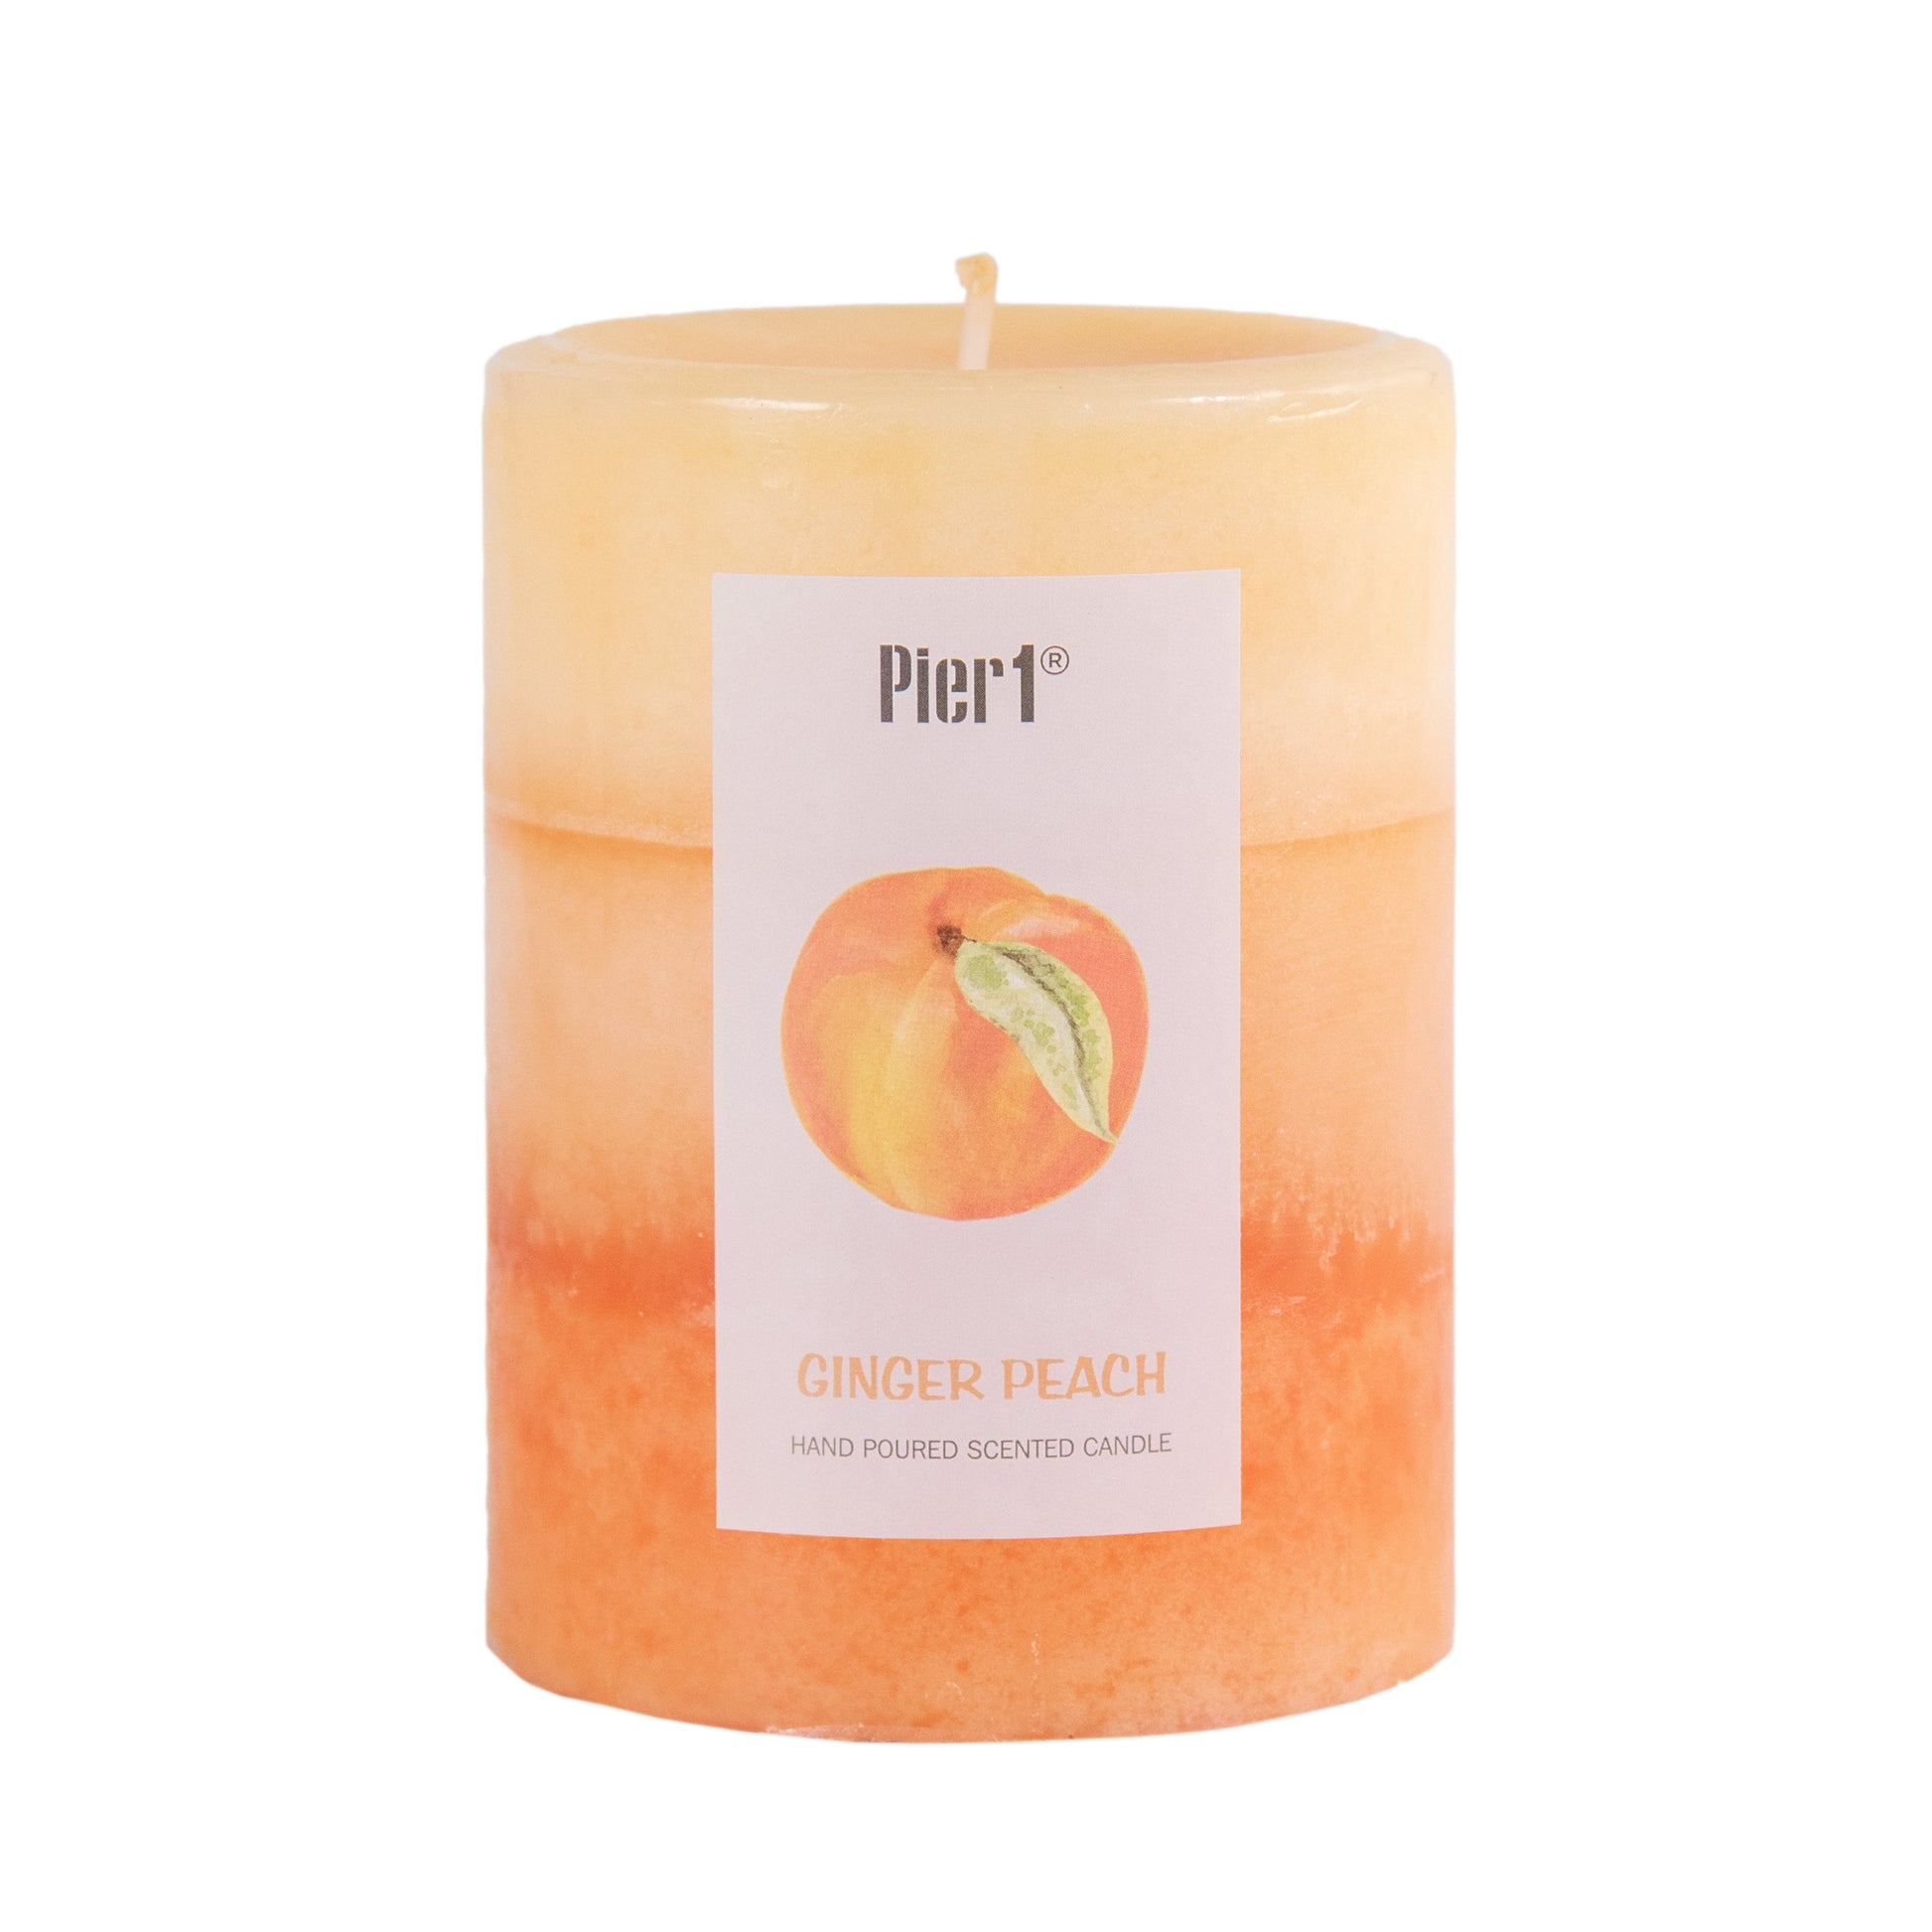 Pier 1 Ginger Peach® 3x4 Layered Pillar Candle - The Home Resolution